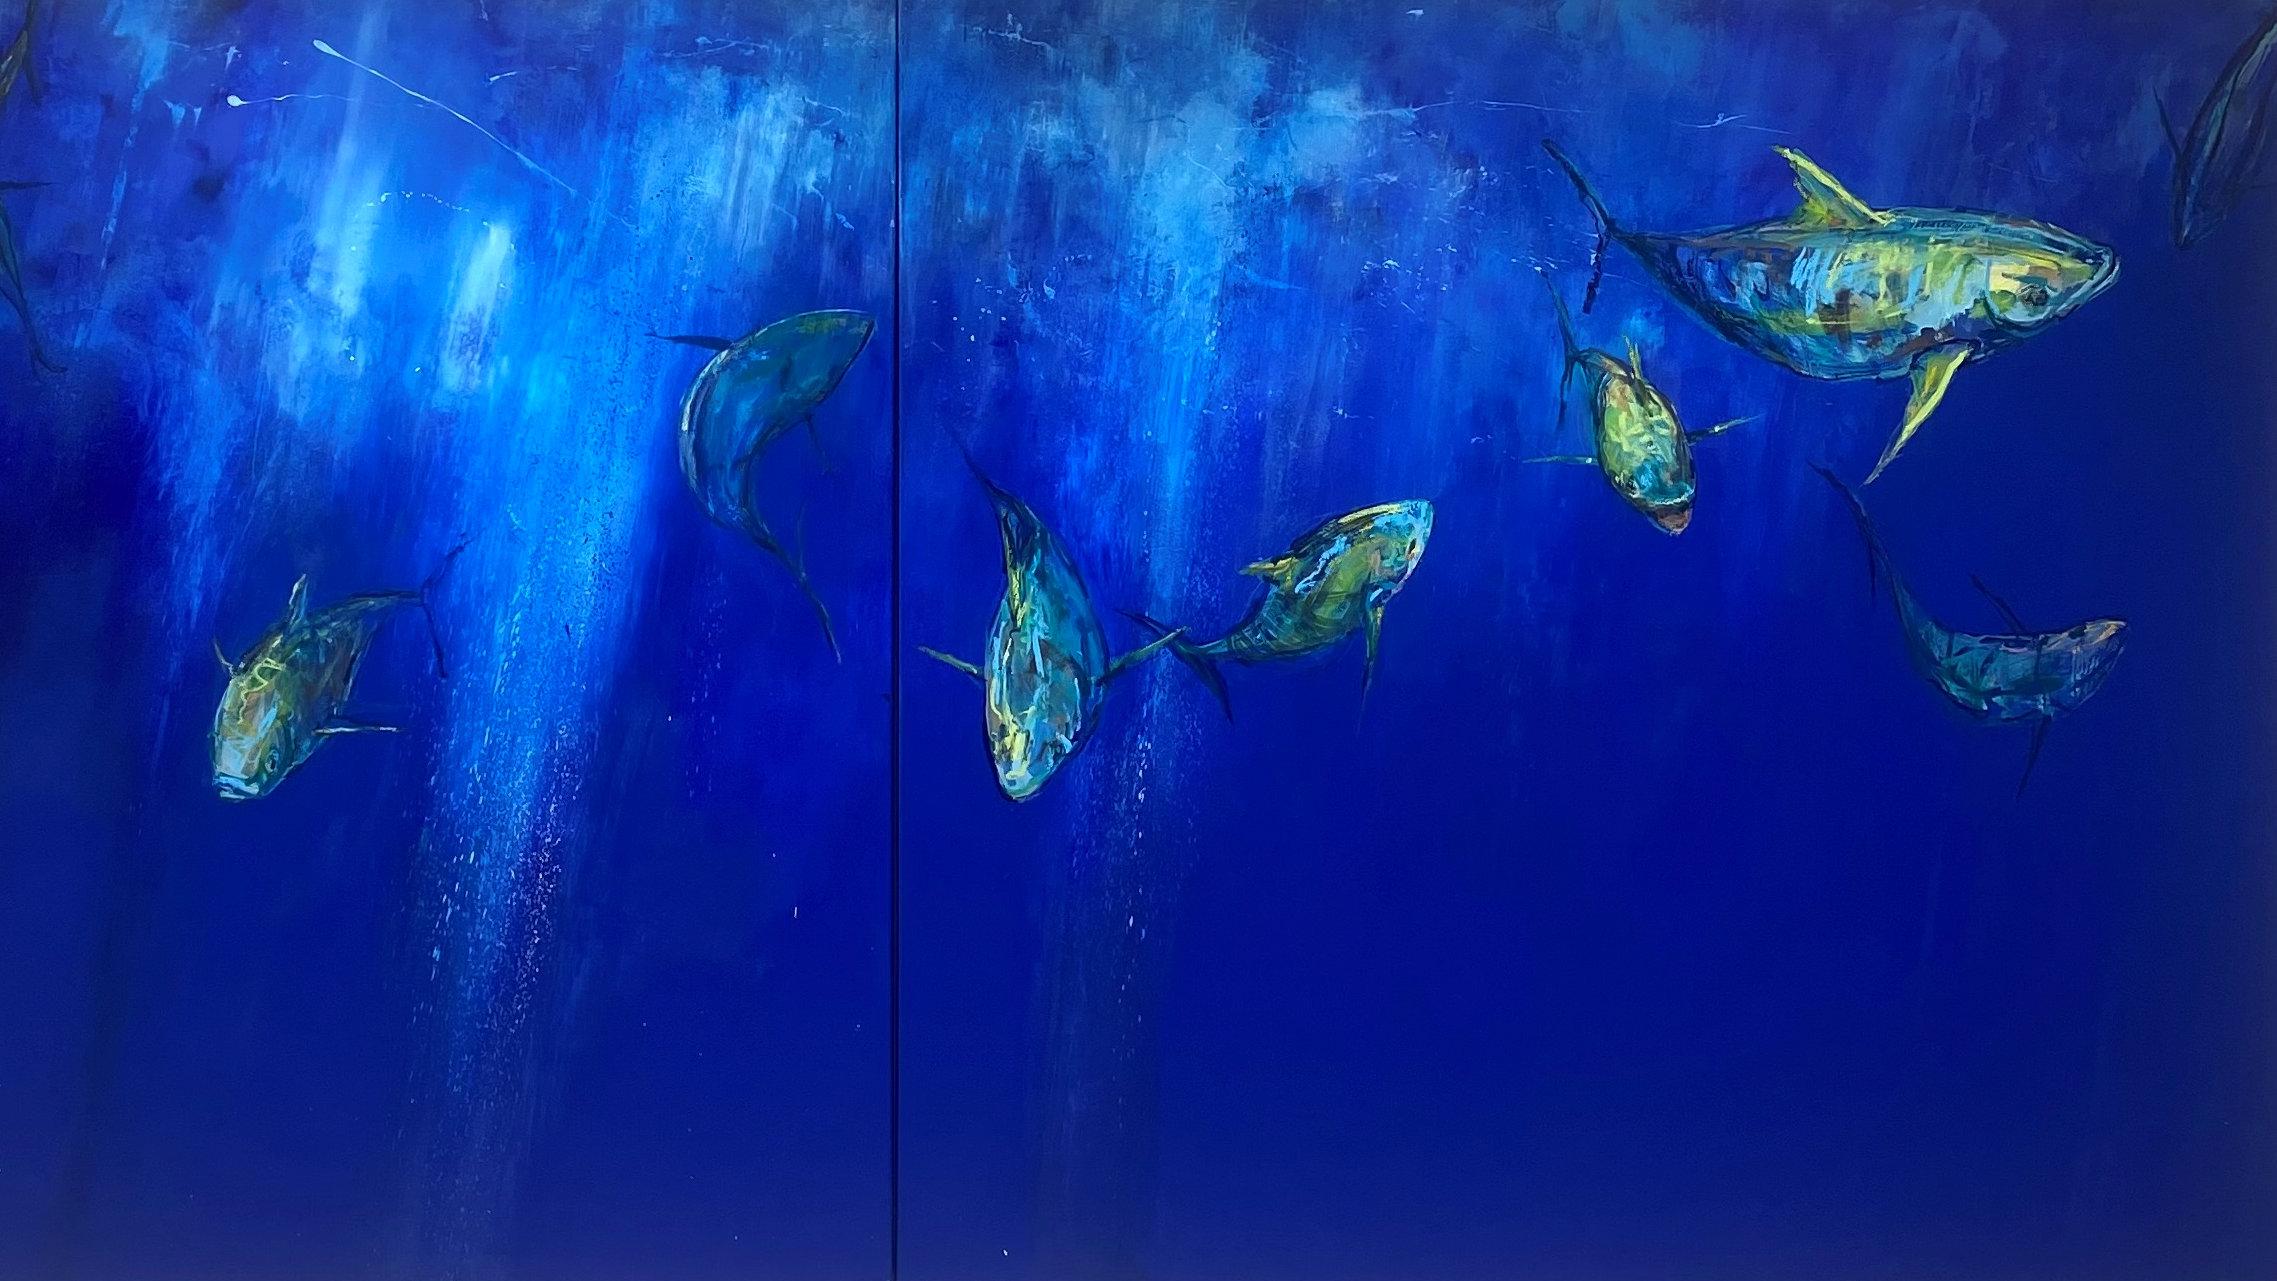 Nicholas Romeril, For the Love of Blue, Dyptych, 2023, Oil on Canvas